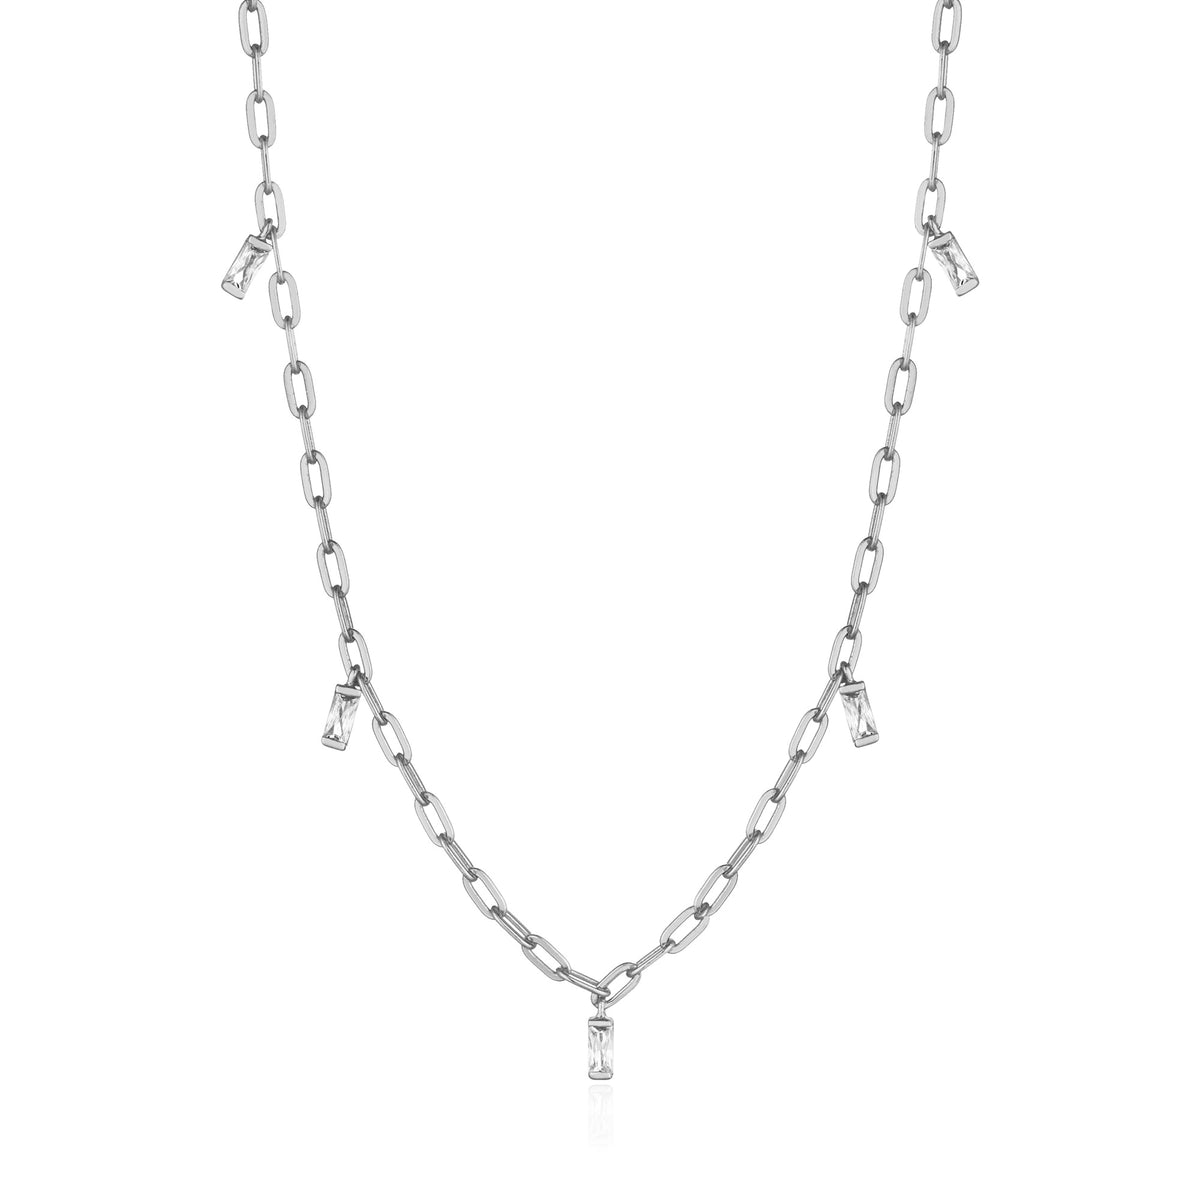 Silver Glow Drop Necklace – Ania Haie